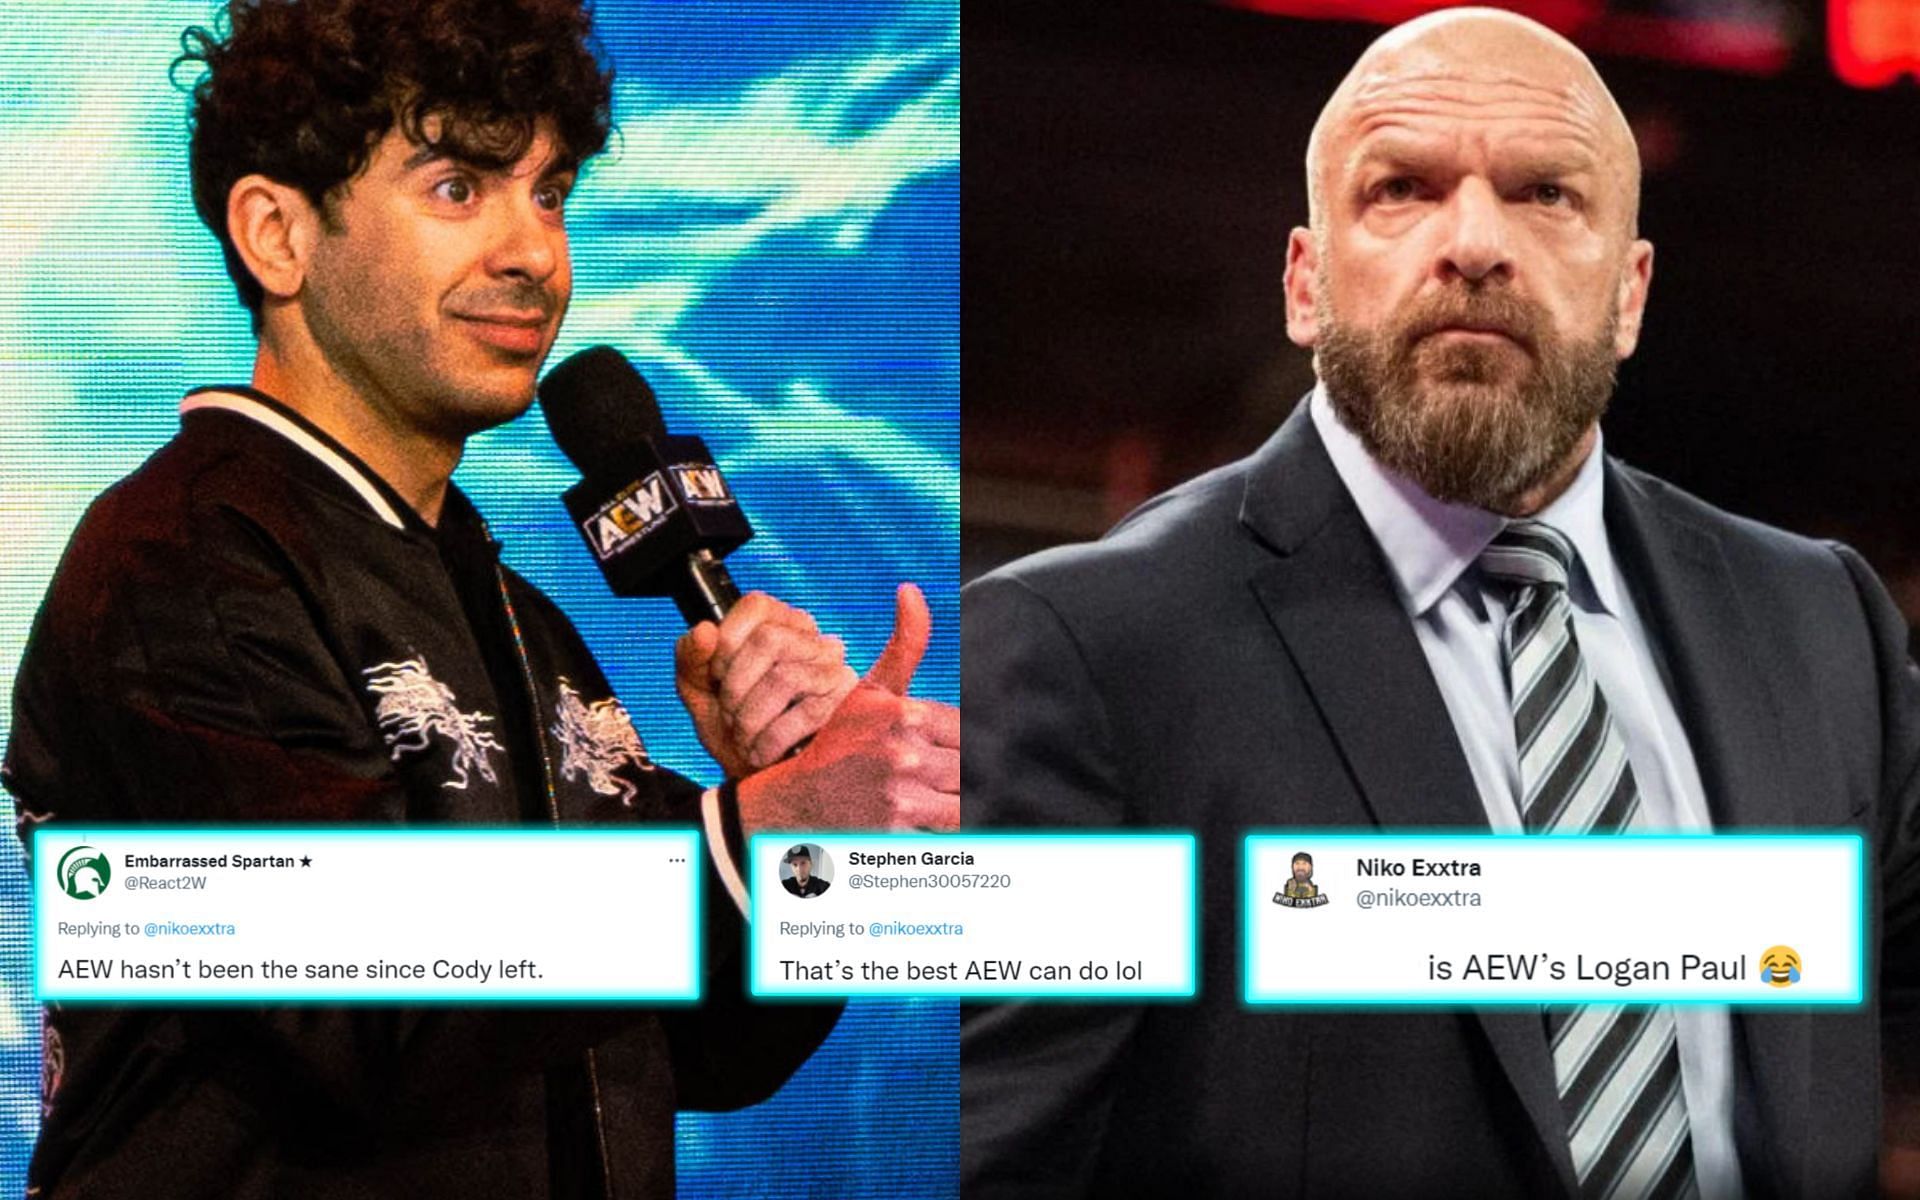 That S The Best AEW Can Do Twitter Berates Tony Khan For Seemingly